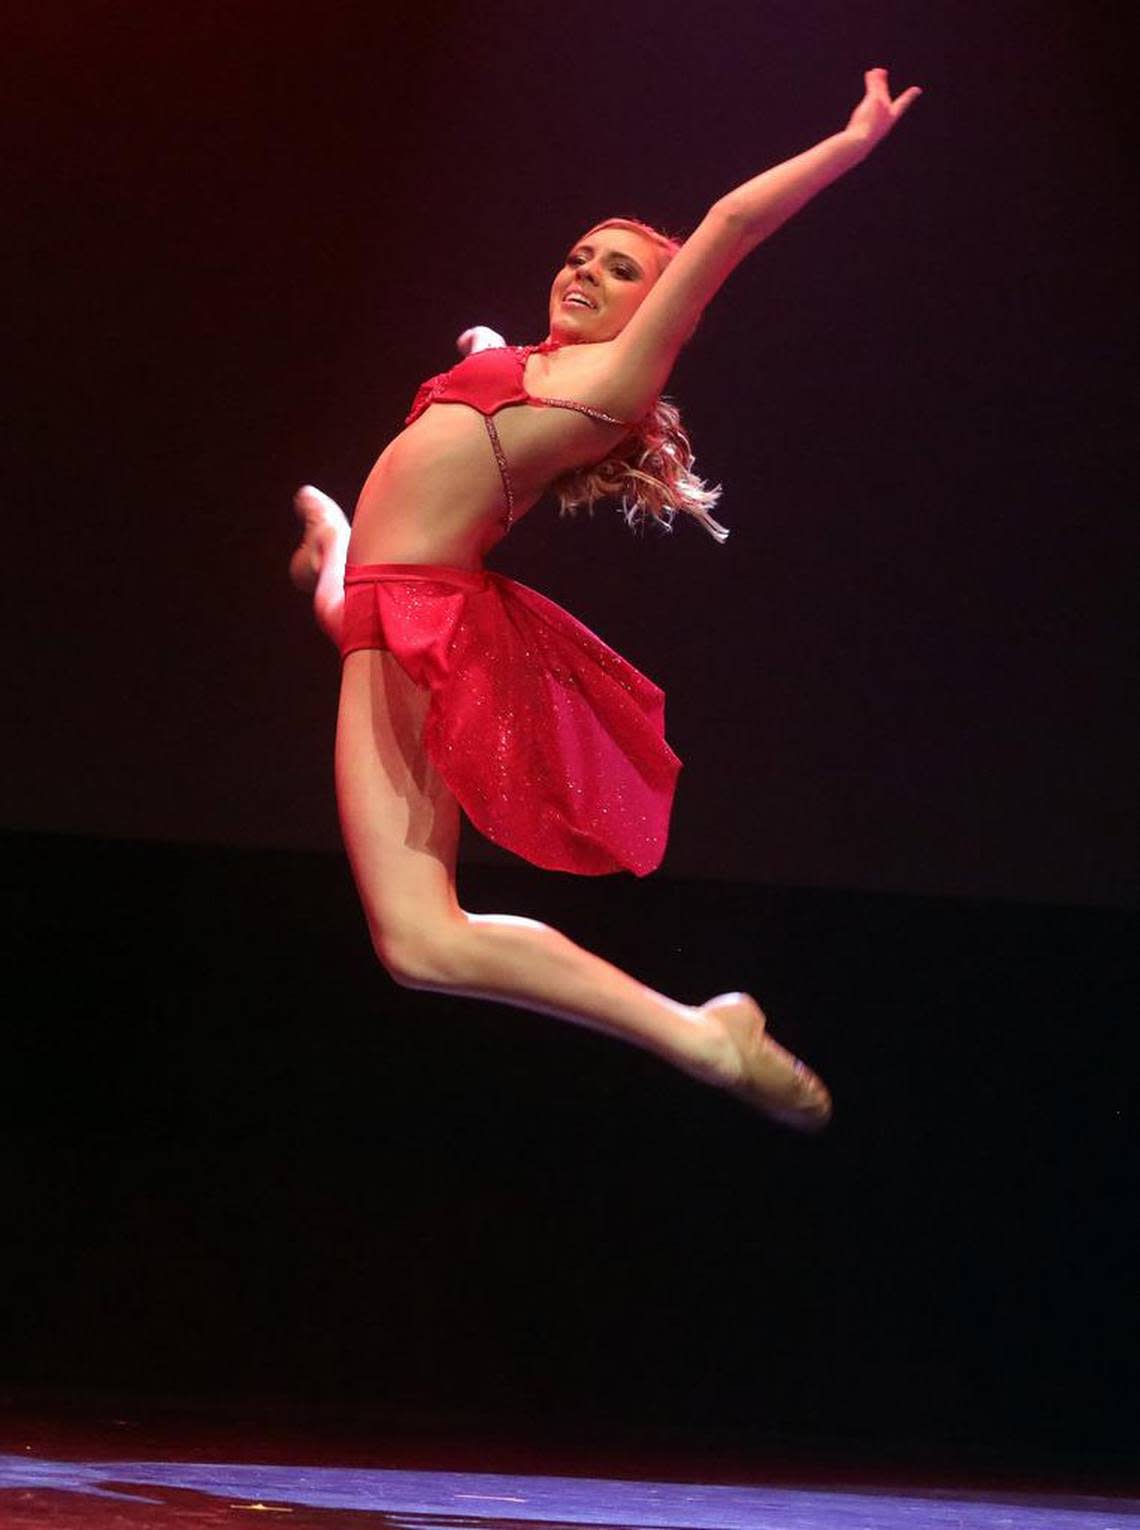 Miss San Diego Natalie Miragliotta won the Miss California Teen Volunteer talent competition with a lyrical dance during the pageant held at the Tower Theatre on Jan. 15, 2023.